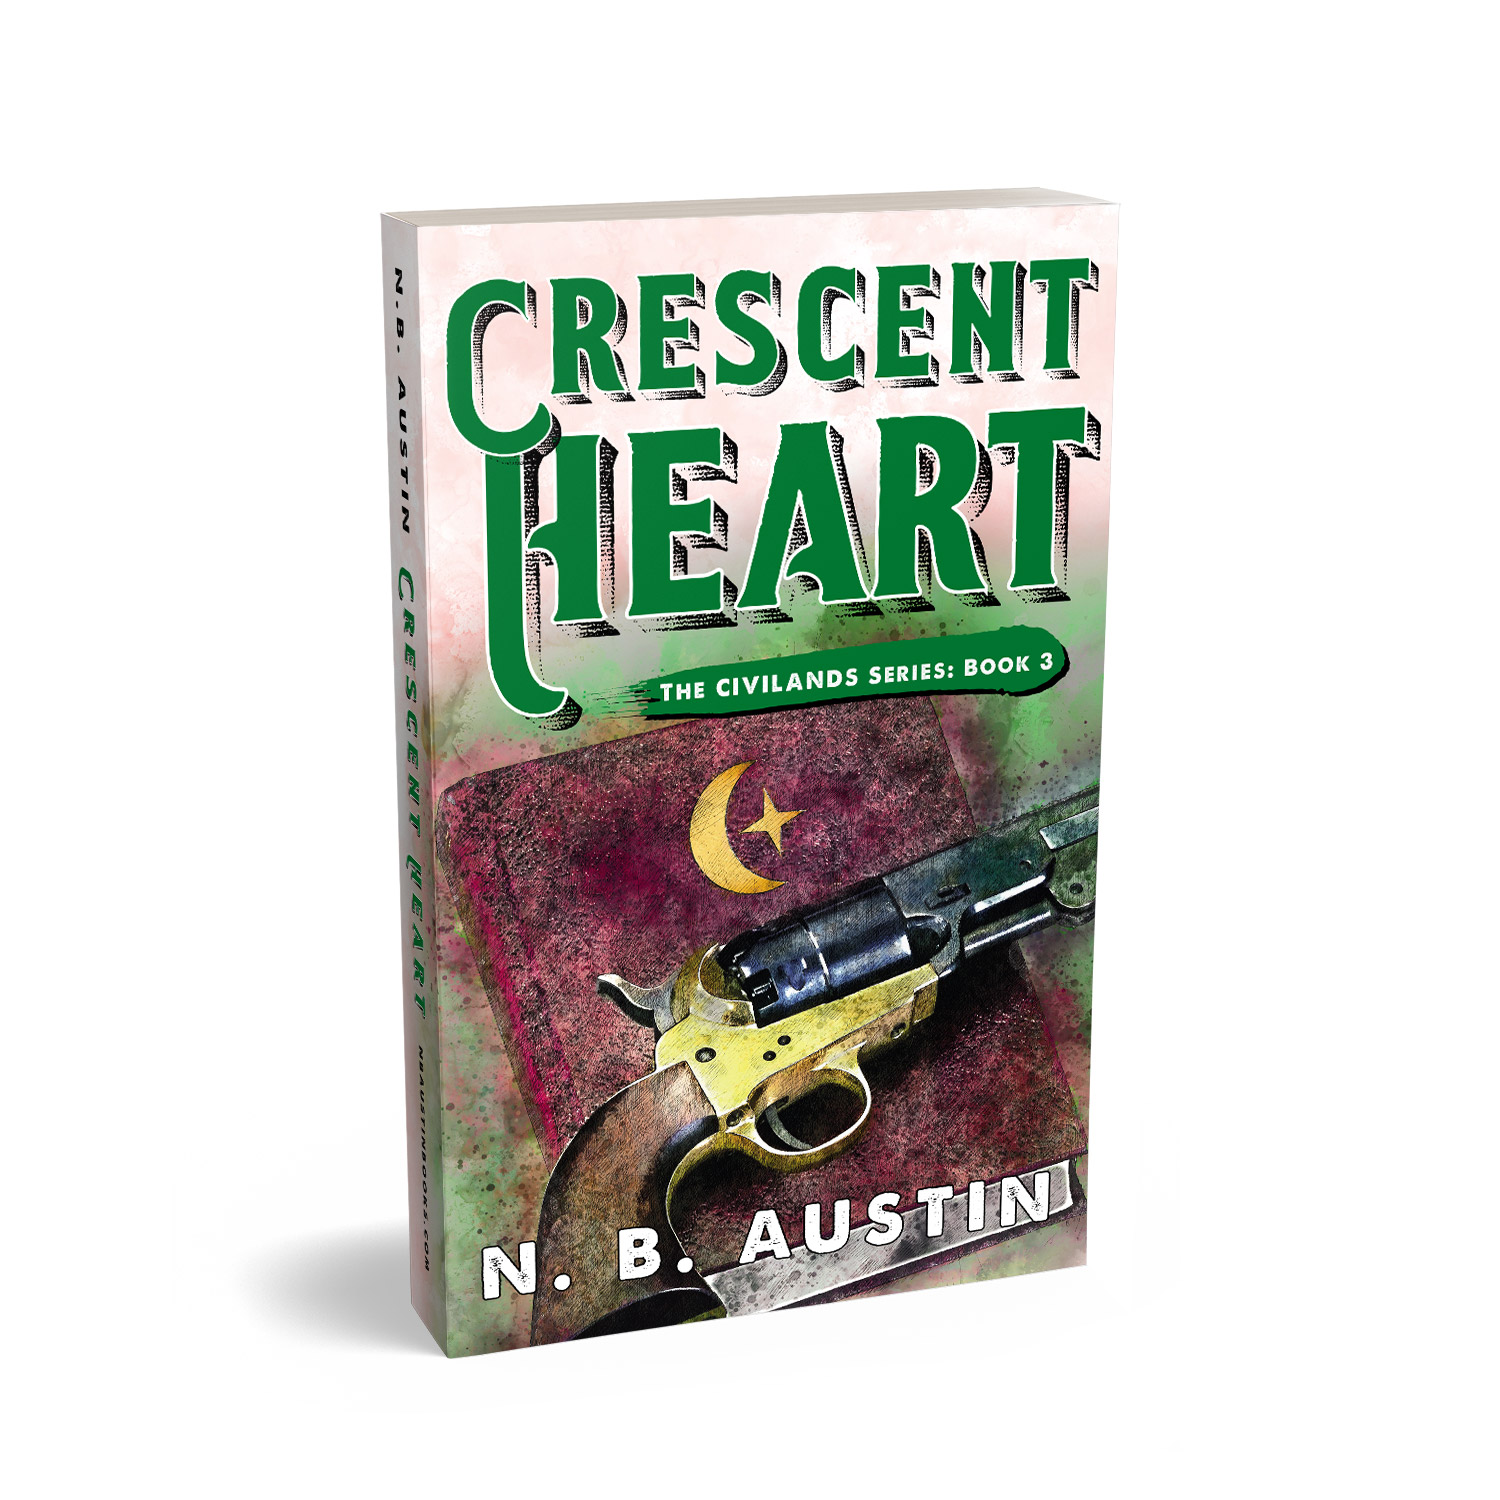 'Crescent Heart' is a sweeping alt-history Western fantasy novel, by N B Austin. The book cover and interior were designed by Mark Thomas, of coverness.com. To find out more about my book design services, please visit www.coverness.com.